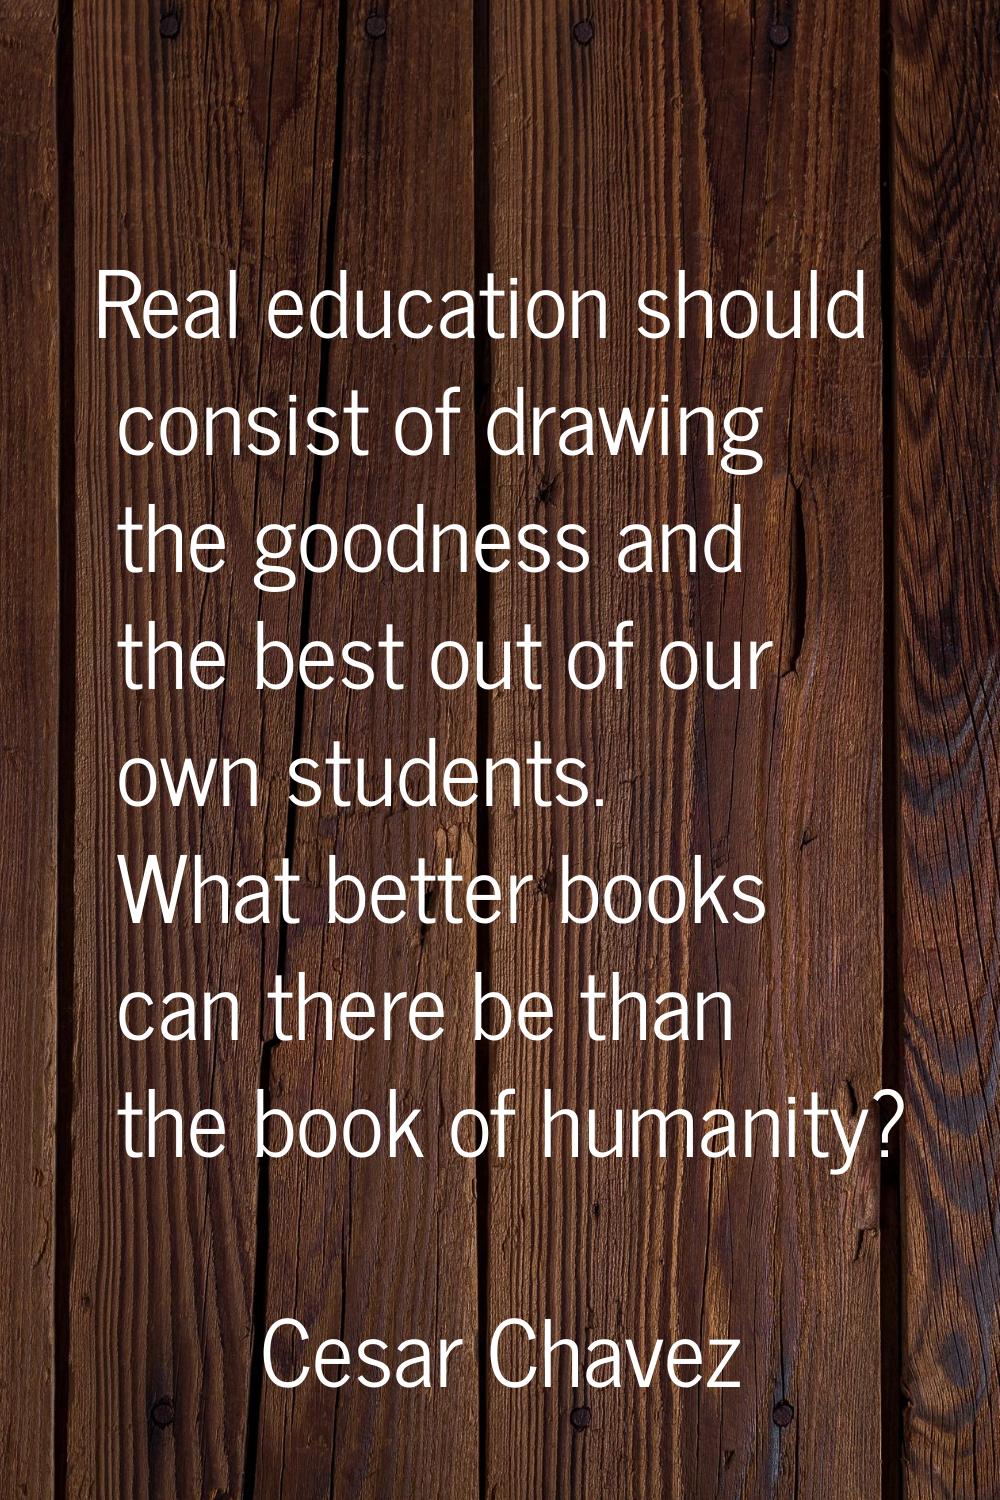 Real education should consist of drawing the goodness and the best out of our own students. What be